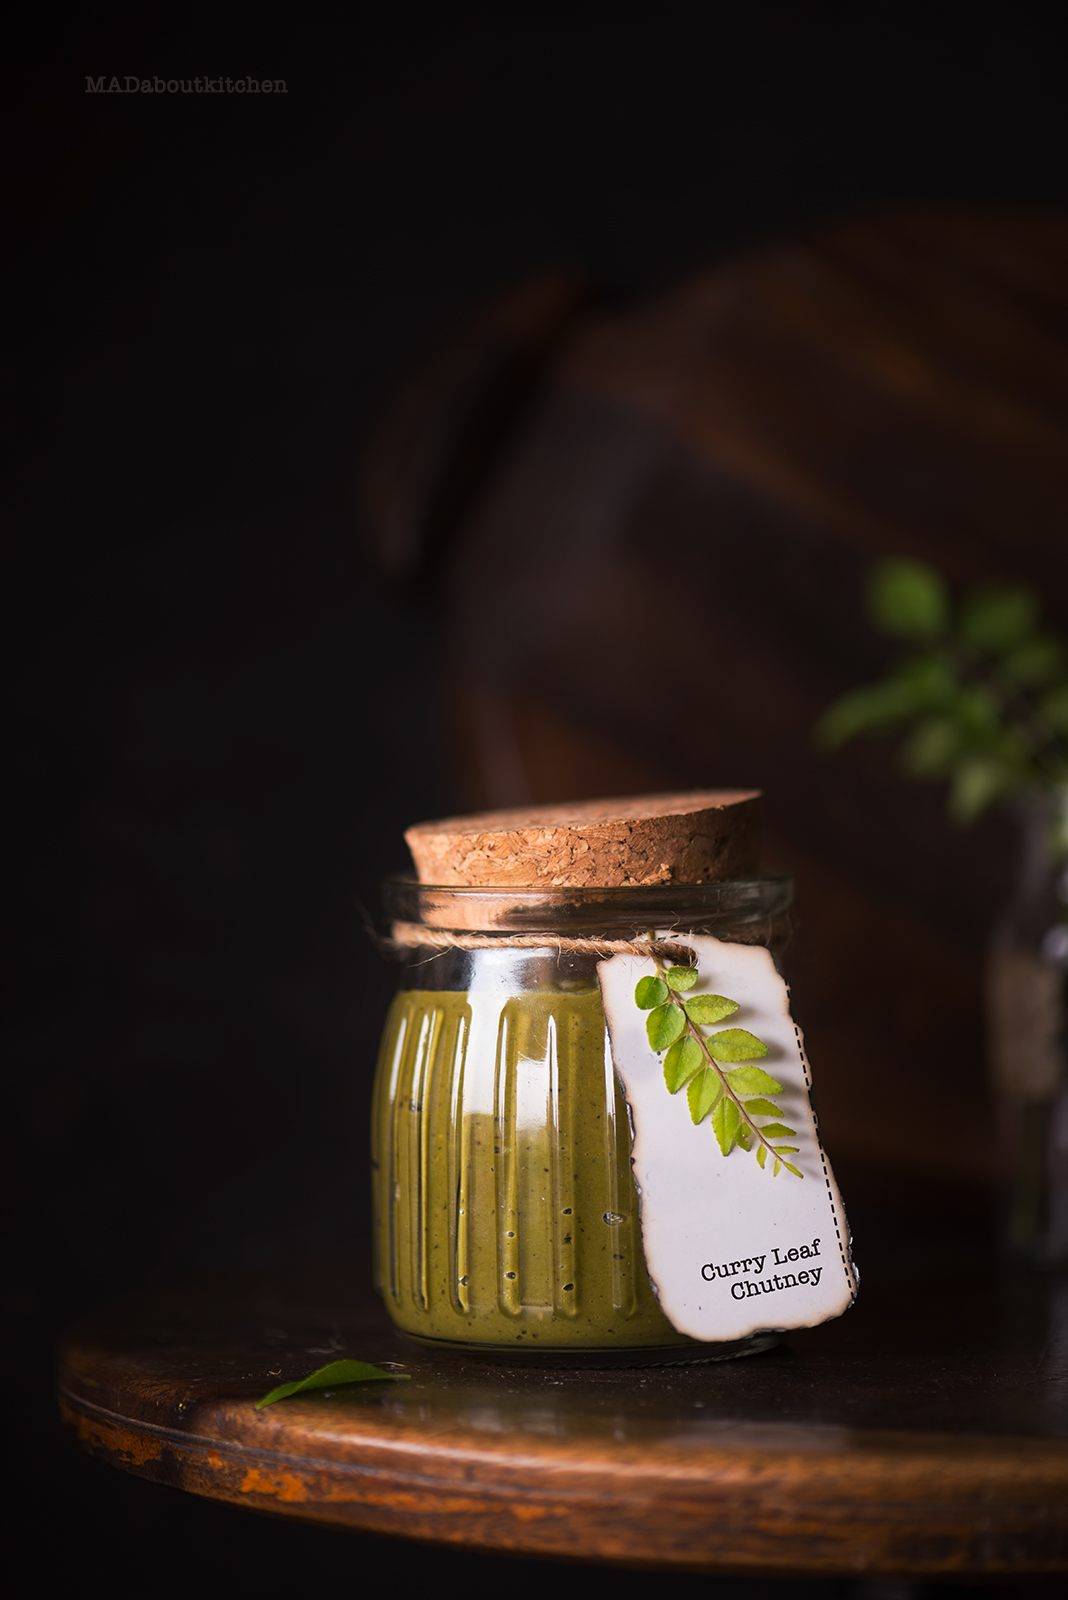 Curry Leaf Chutney is a basic recipe for a sweet and sour Indian chutney that goes with any Indian dish. You can serve it with almost anything.